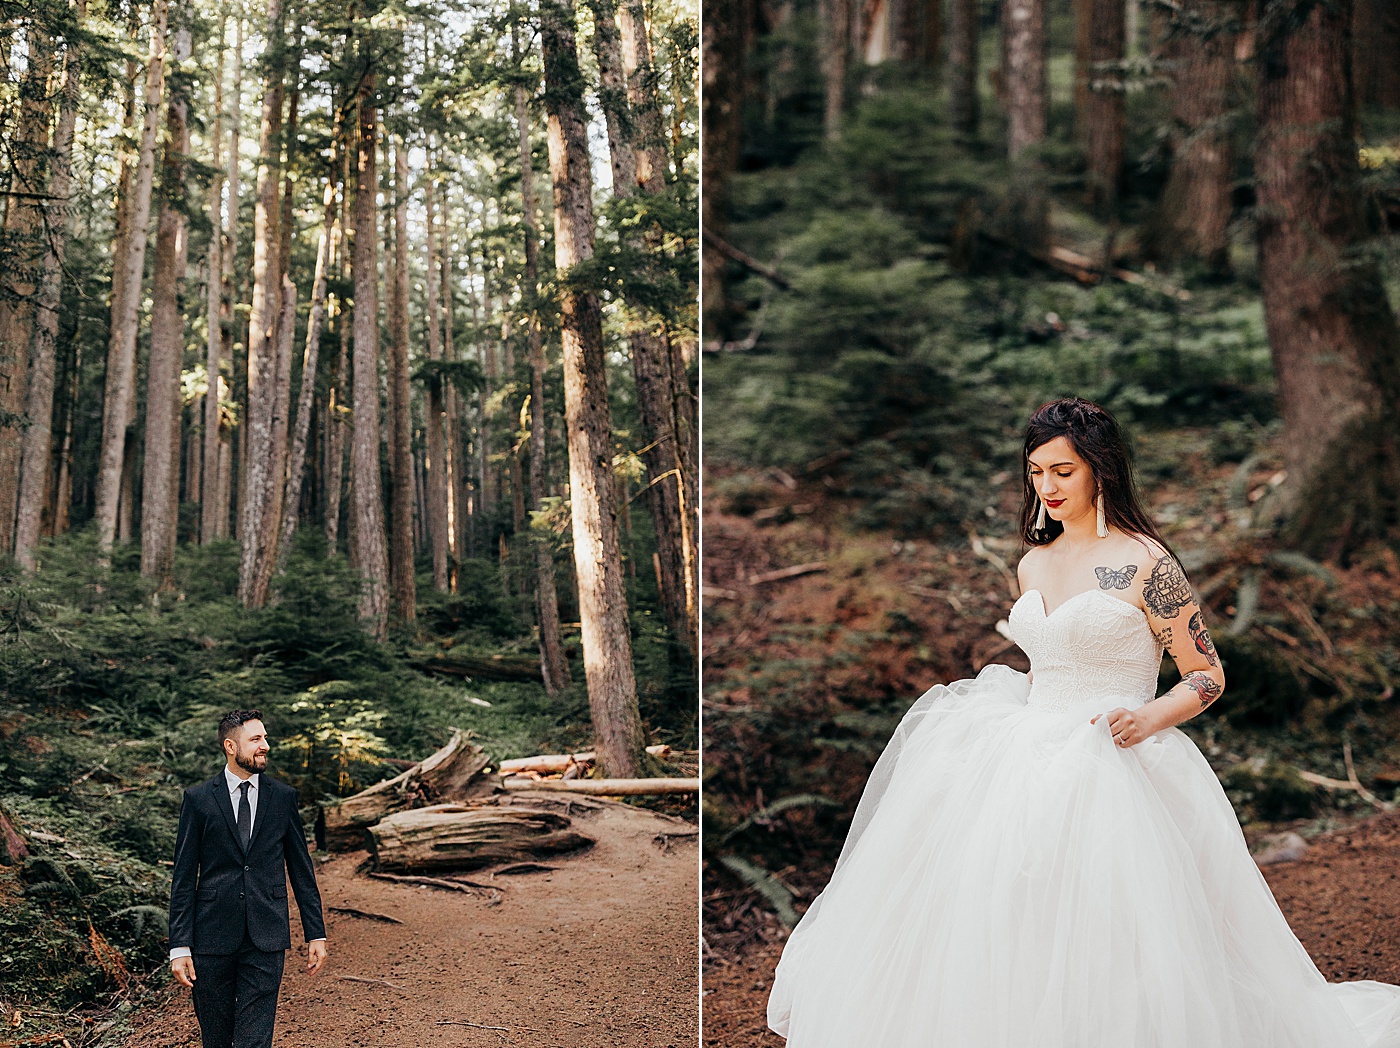 Bride and groom portraits in Mount Rainier forest | Photo by Megan Montalvo Photography